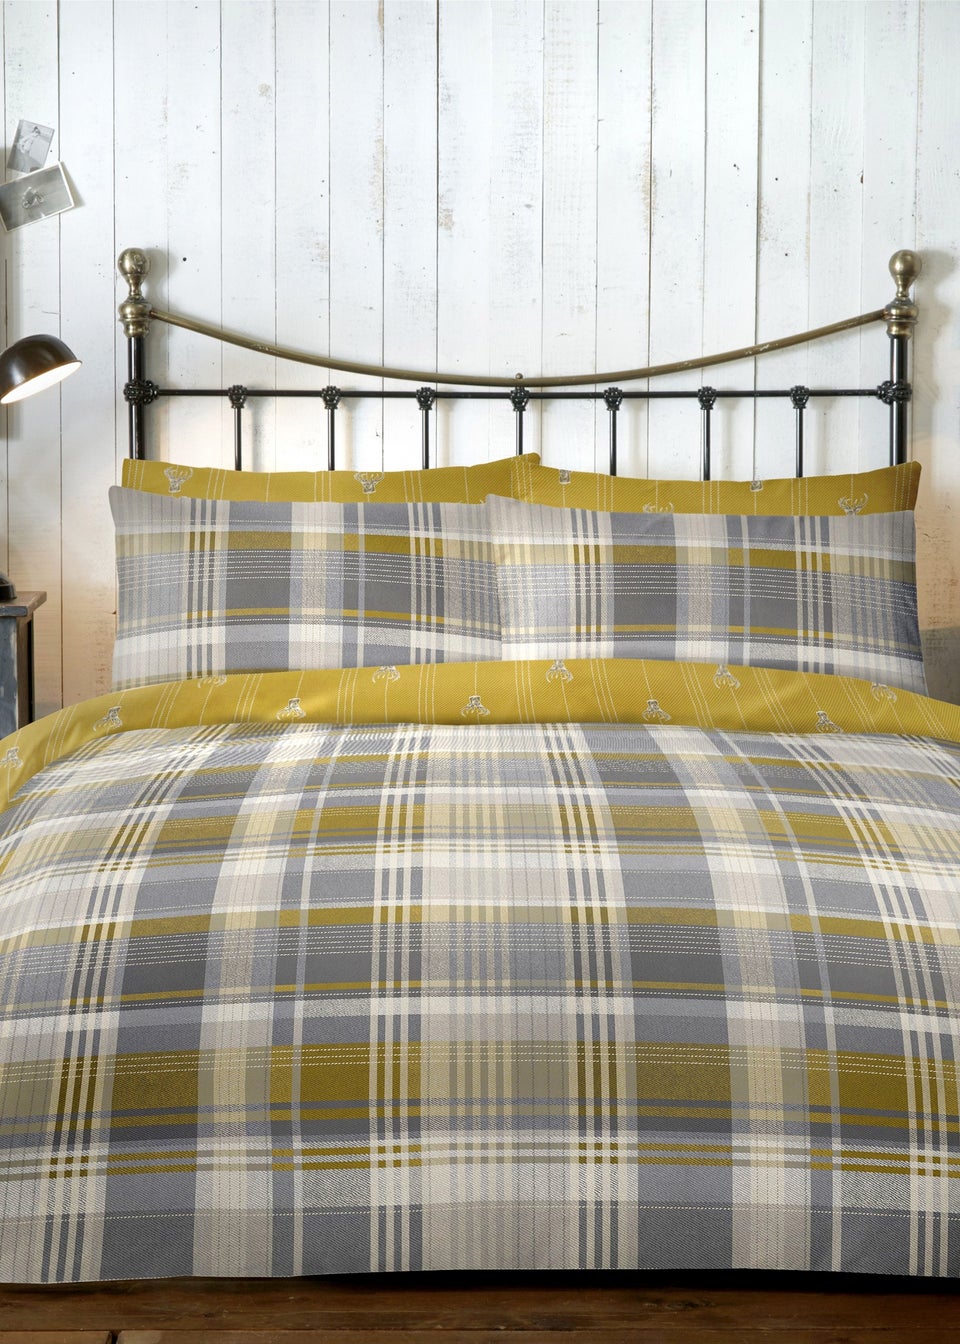 Dreams & Drapes Lodge Connolly Check Brushed Cotton Yellow Duvet Cover Set